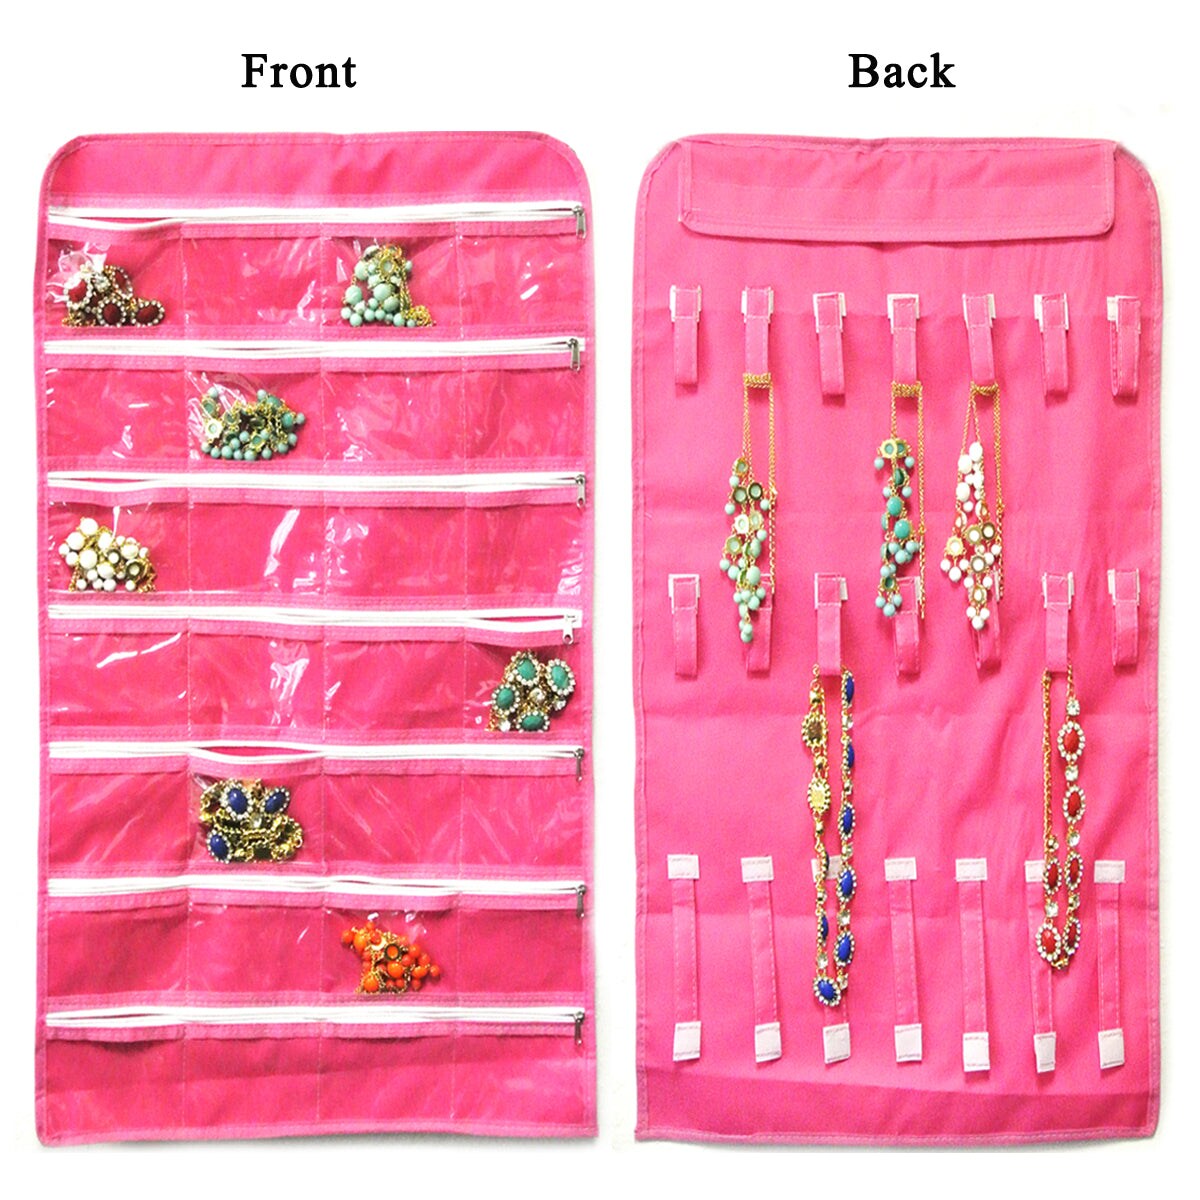 28 Zippered Pockets Hanging Jewelry Organizer with 21 Holding Loops ...